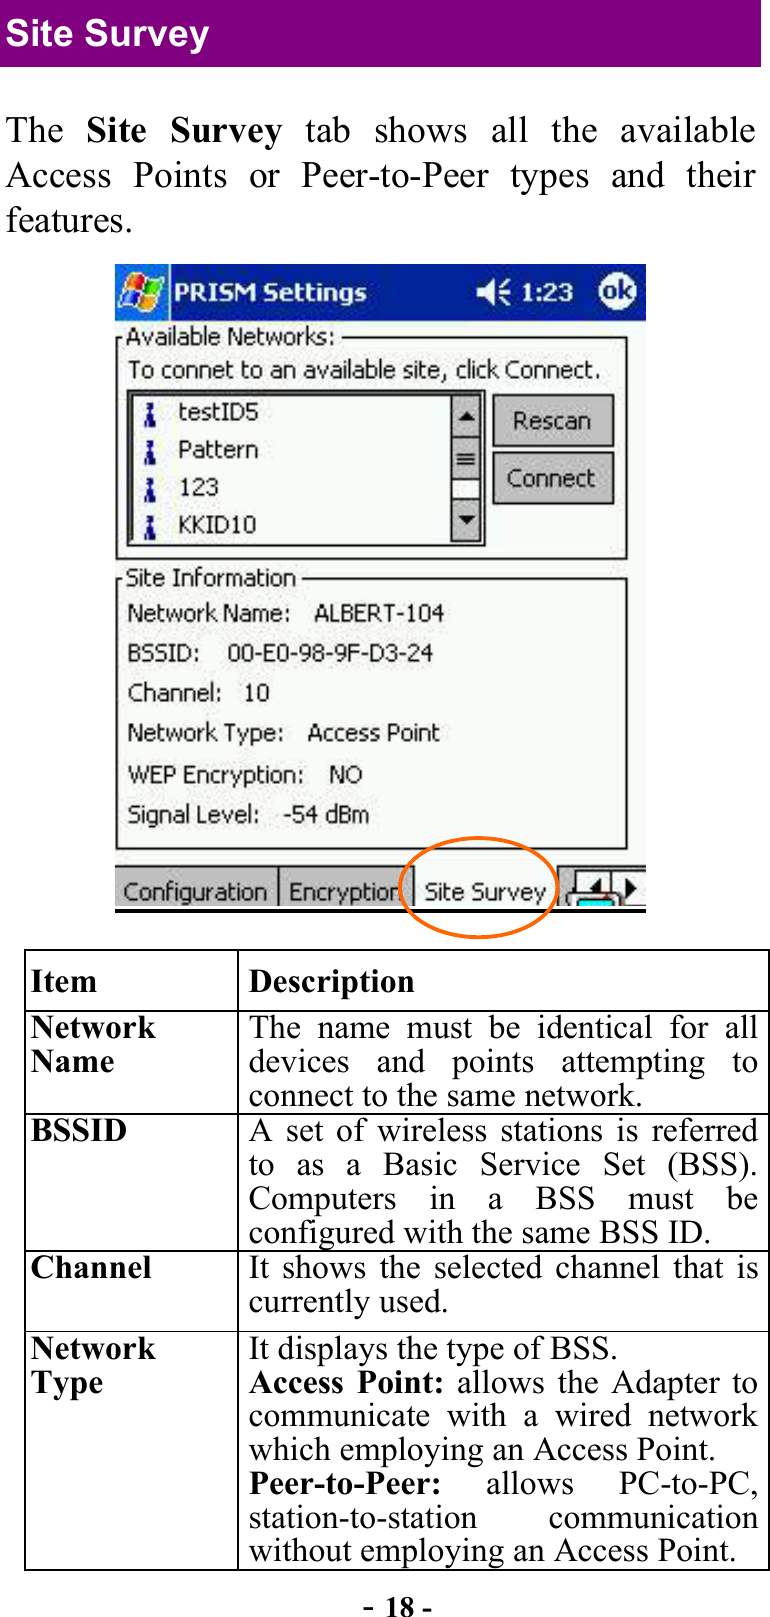  - 18 - Site Survey The  Site Survey tab shows all the available Access Points or Peer-to-Peer types and their features.   Item Description Network Name The name must be identical for all devices and points attempting to connect to the same network. BSSID  A set of wireless stations is referred to as a Basic Service Set (BSS). Computers in a BSS must be configured with the same BSS ID. Channel  It shows the selected channel that is currently used. Network Type It displays the type of BSS. Access Point: allows the Adapter to communicate with a wired network which employing an Access Point.   Peer-to-Peer:  allows PC-to-PC, station-to-station communication without employing an Access Point.